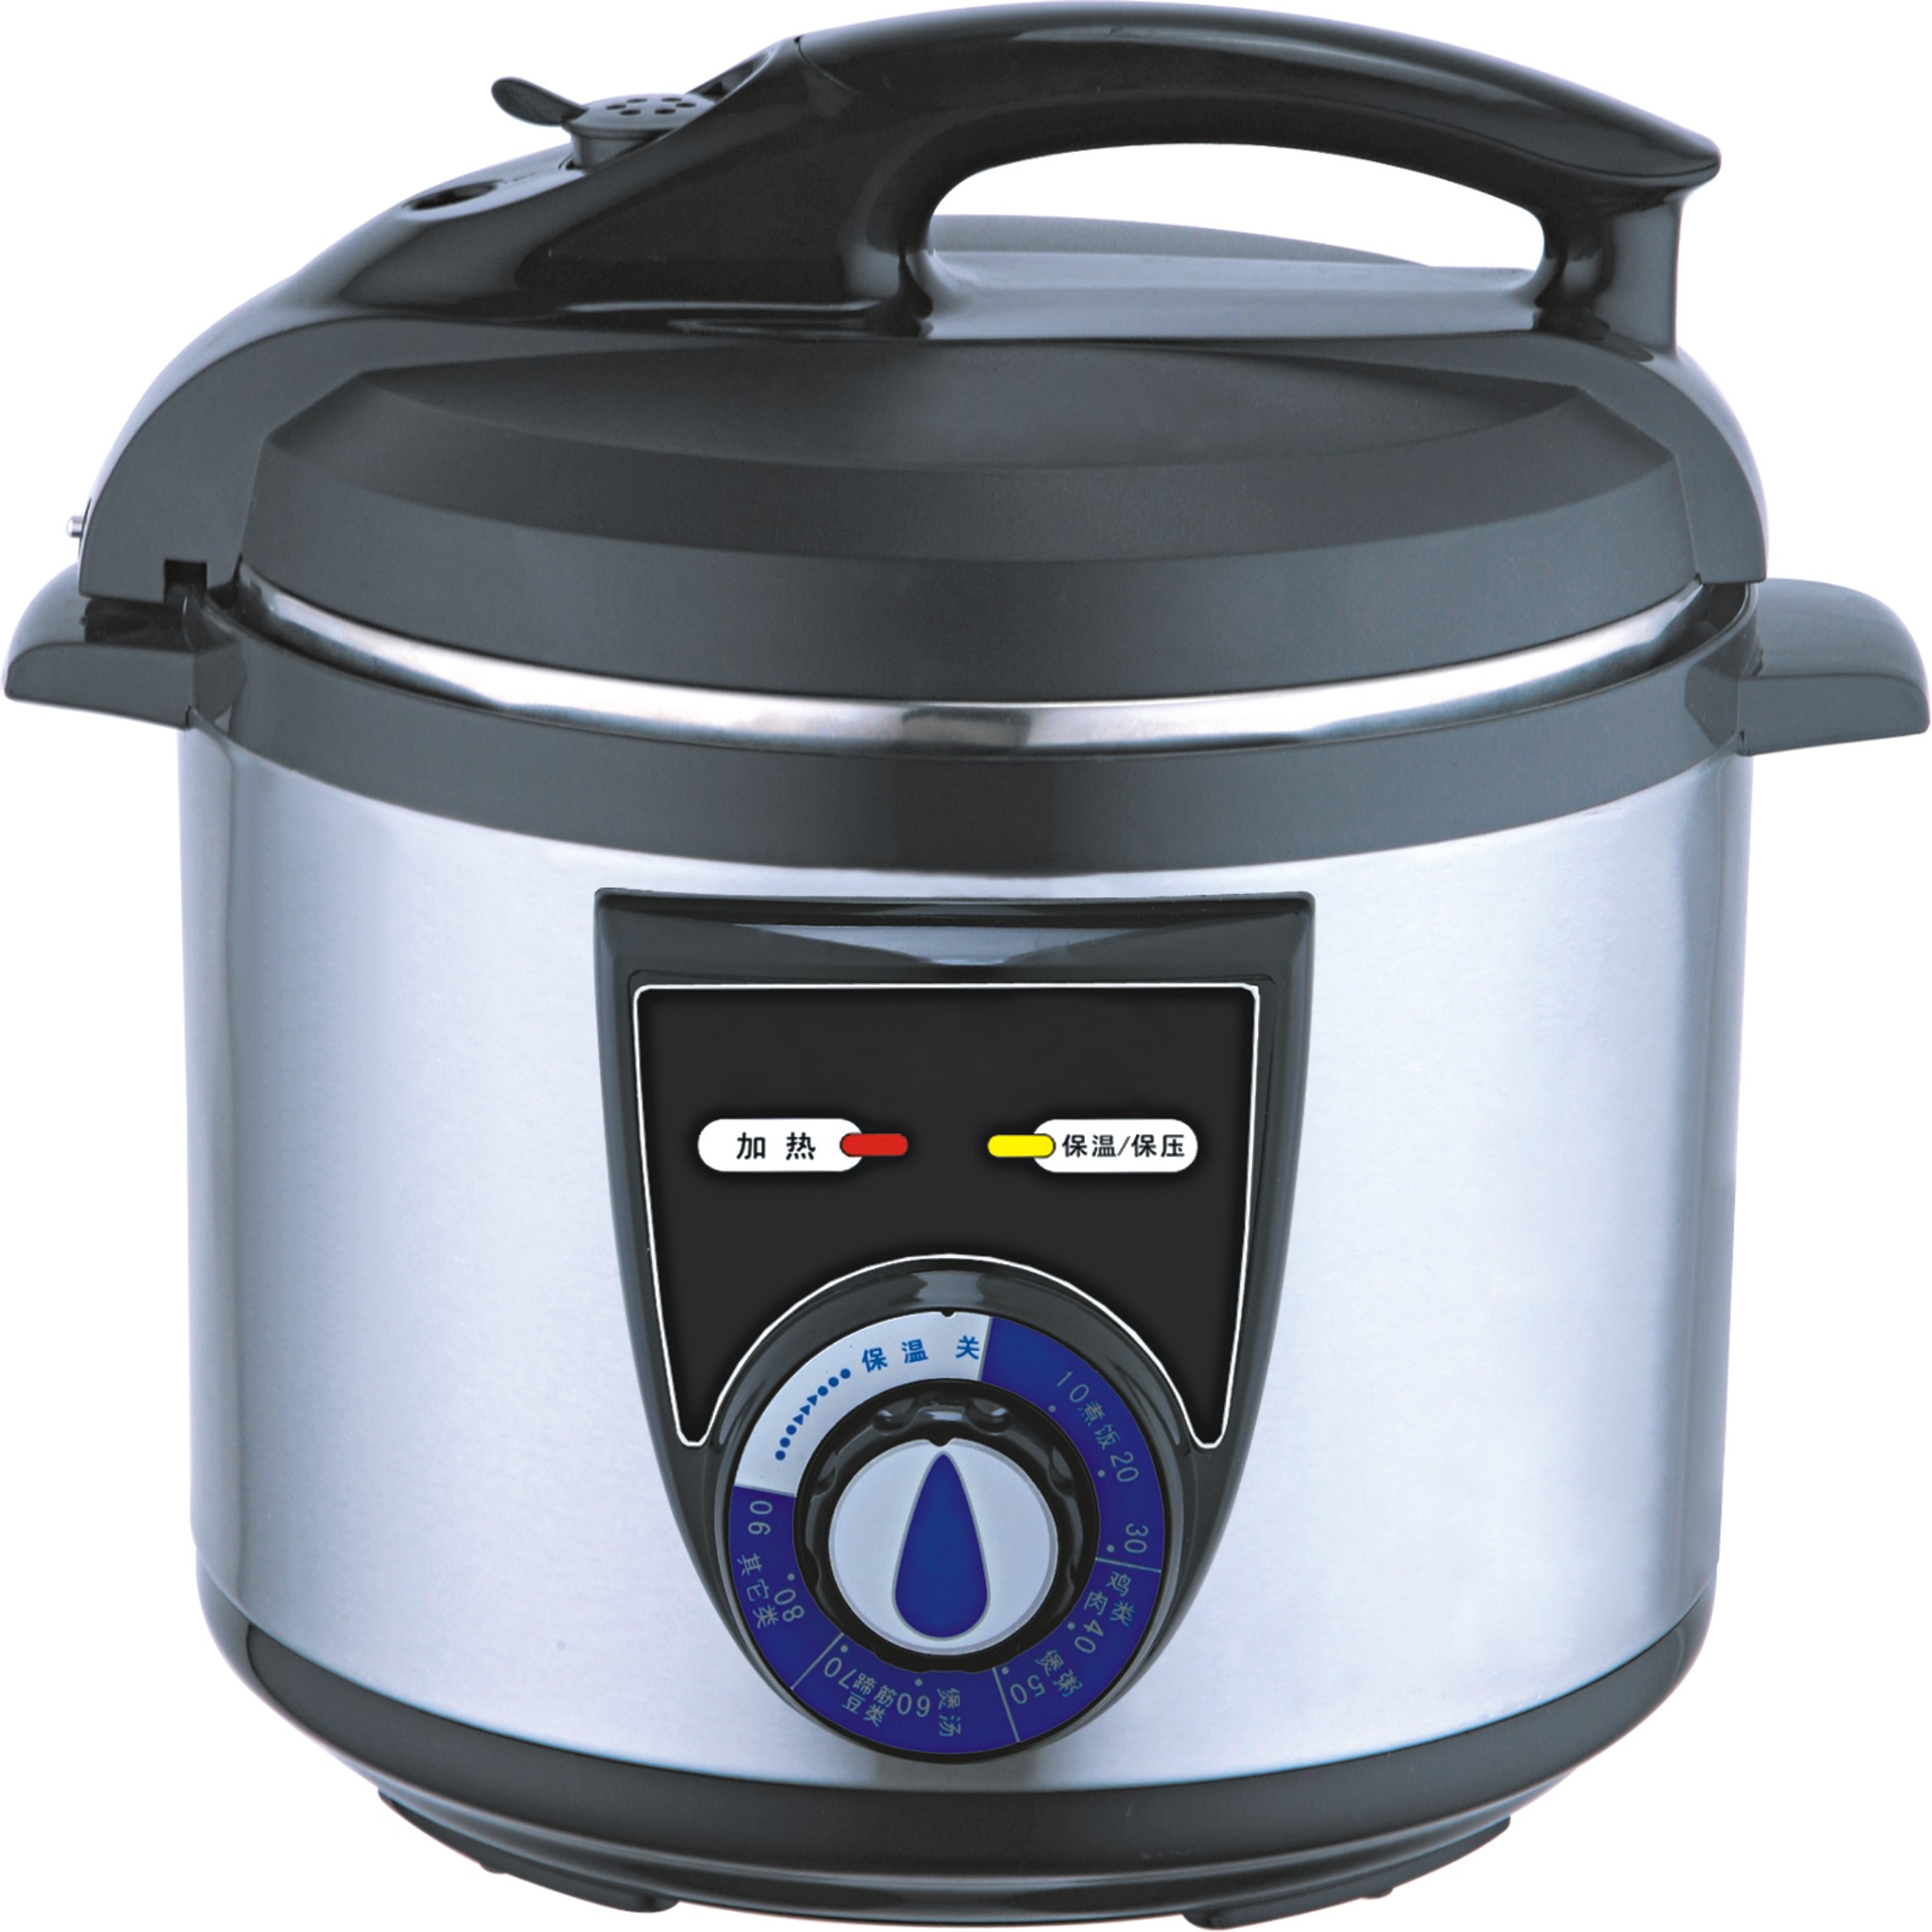 Automatic Digital display and Control Electric stainless steel commercial pressure cooker